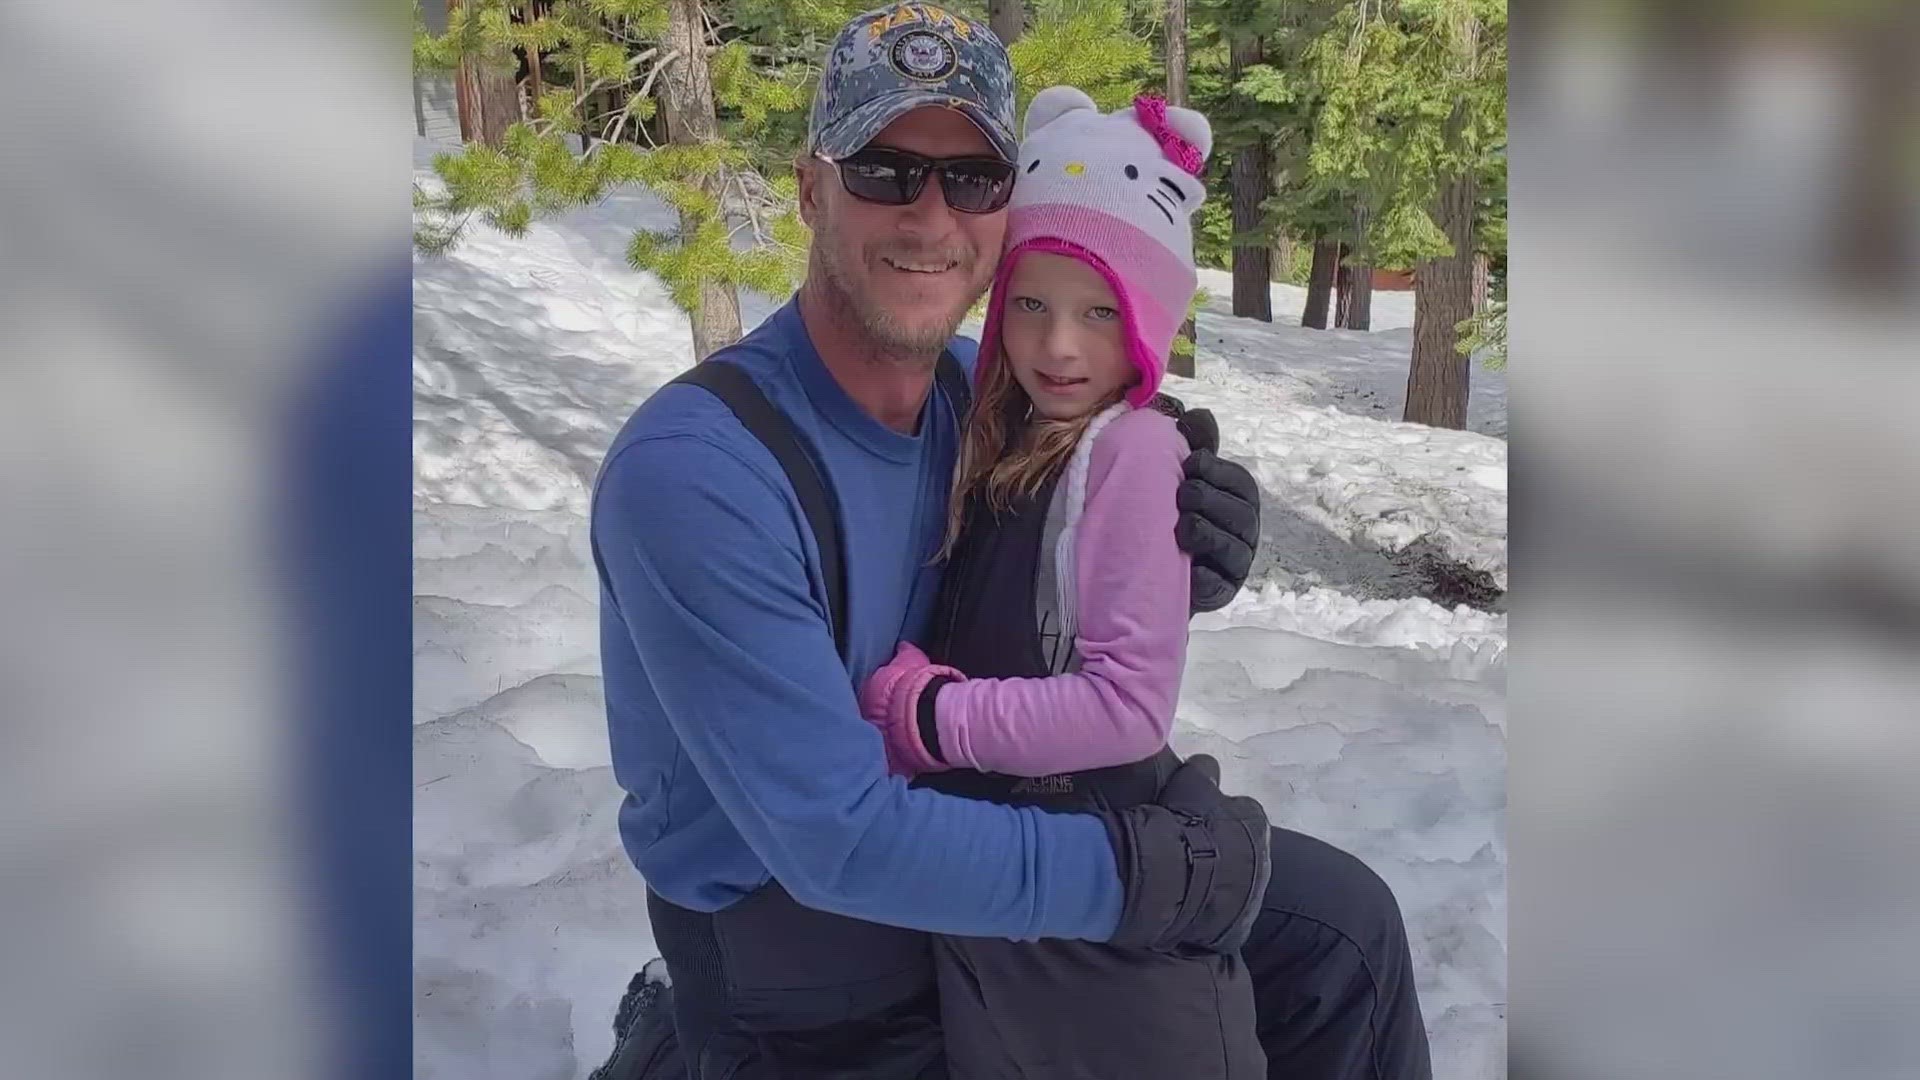 A family in Placer County is mourning the loss of a father of 2.